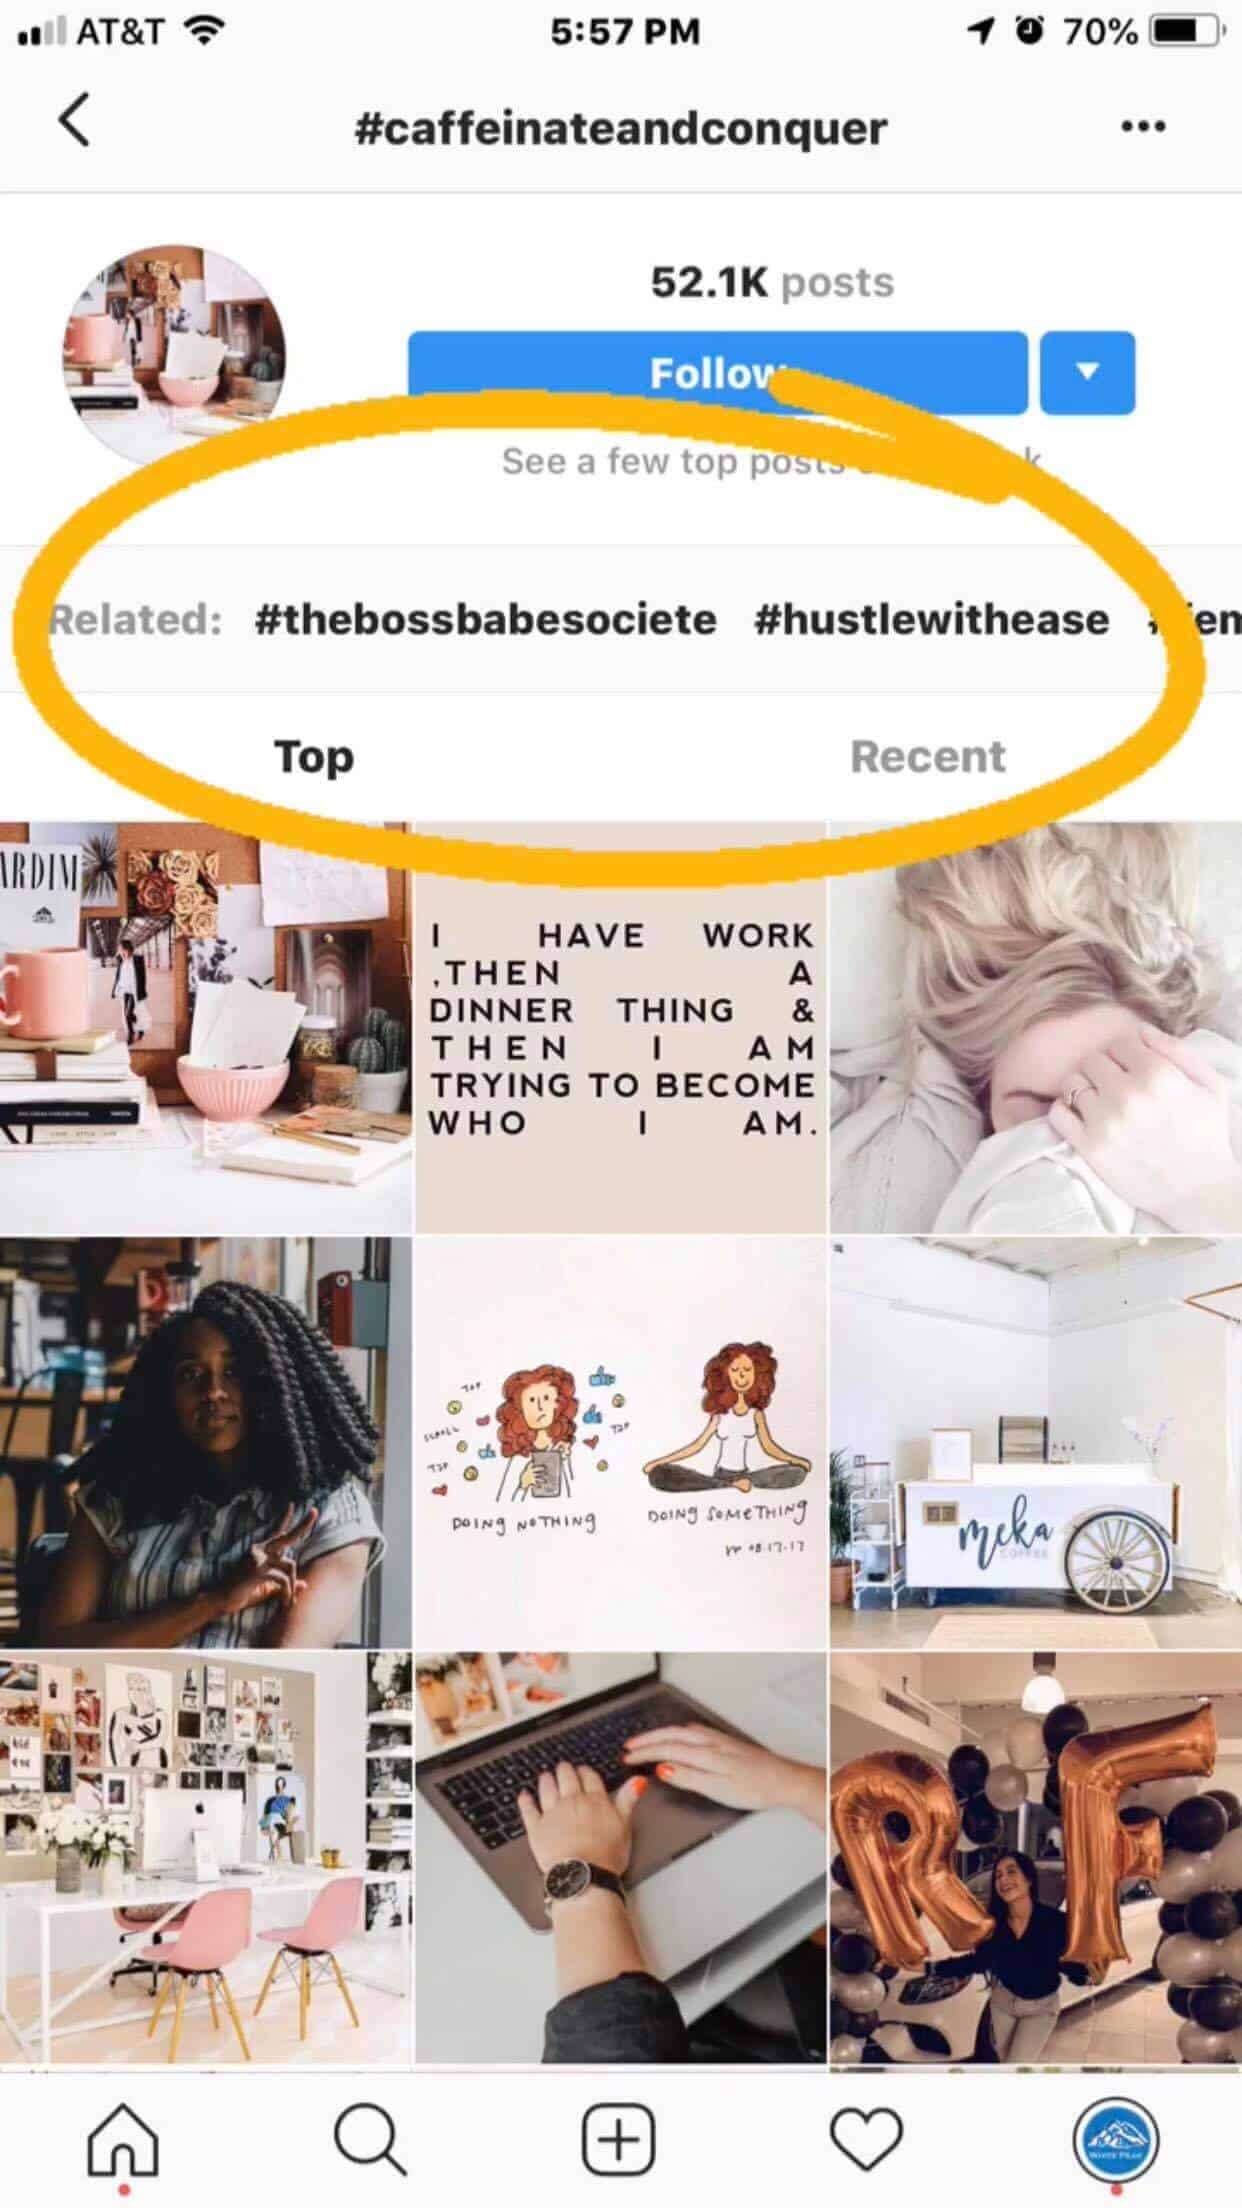 Related Hashtags Instagram